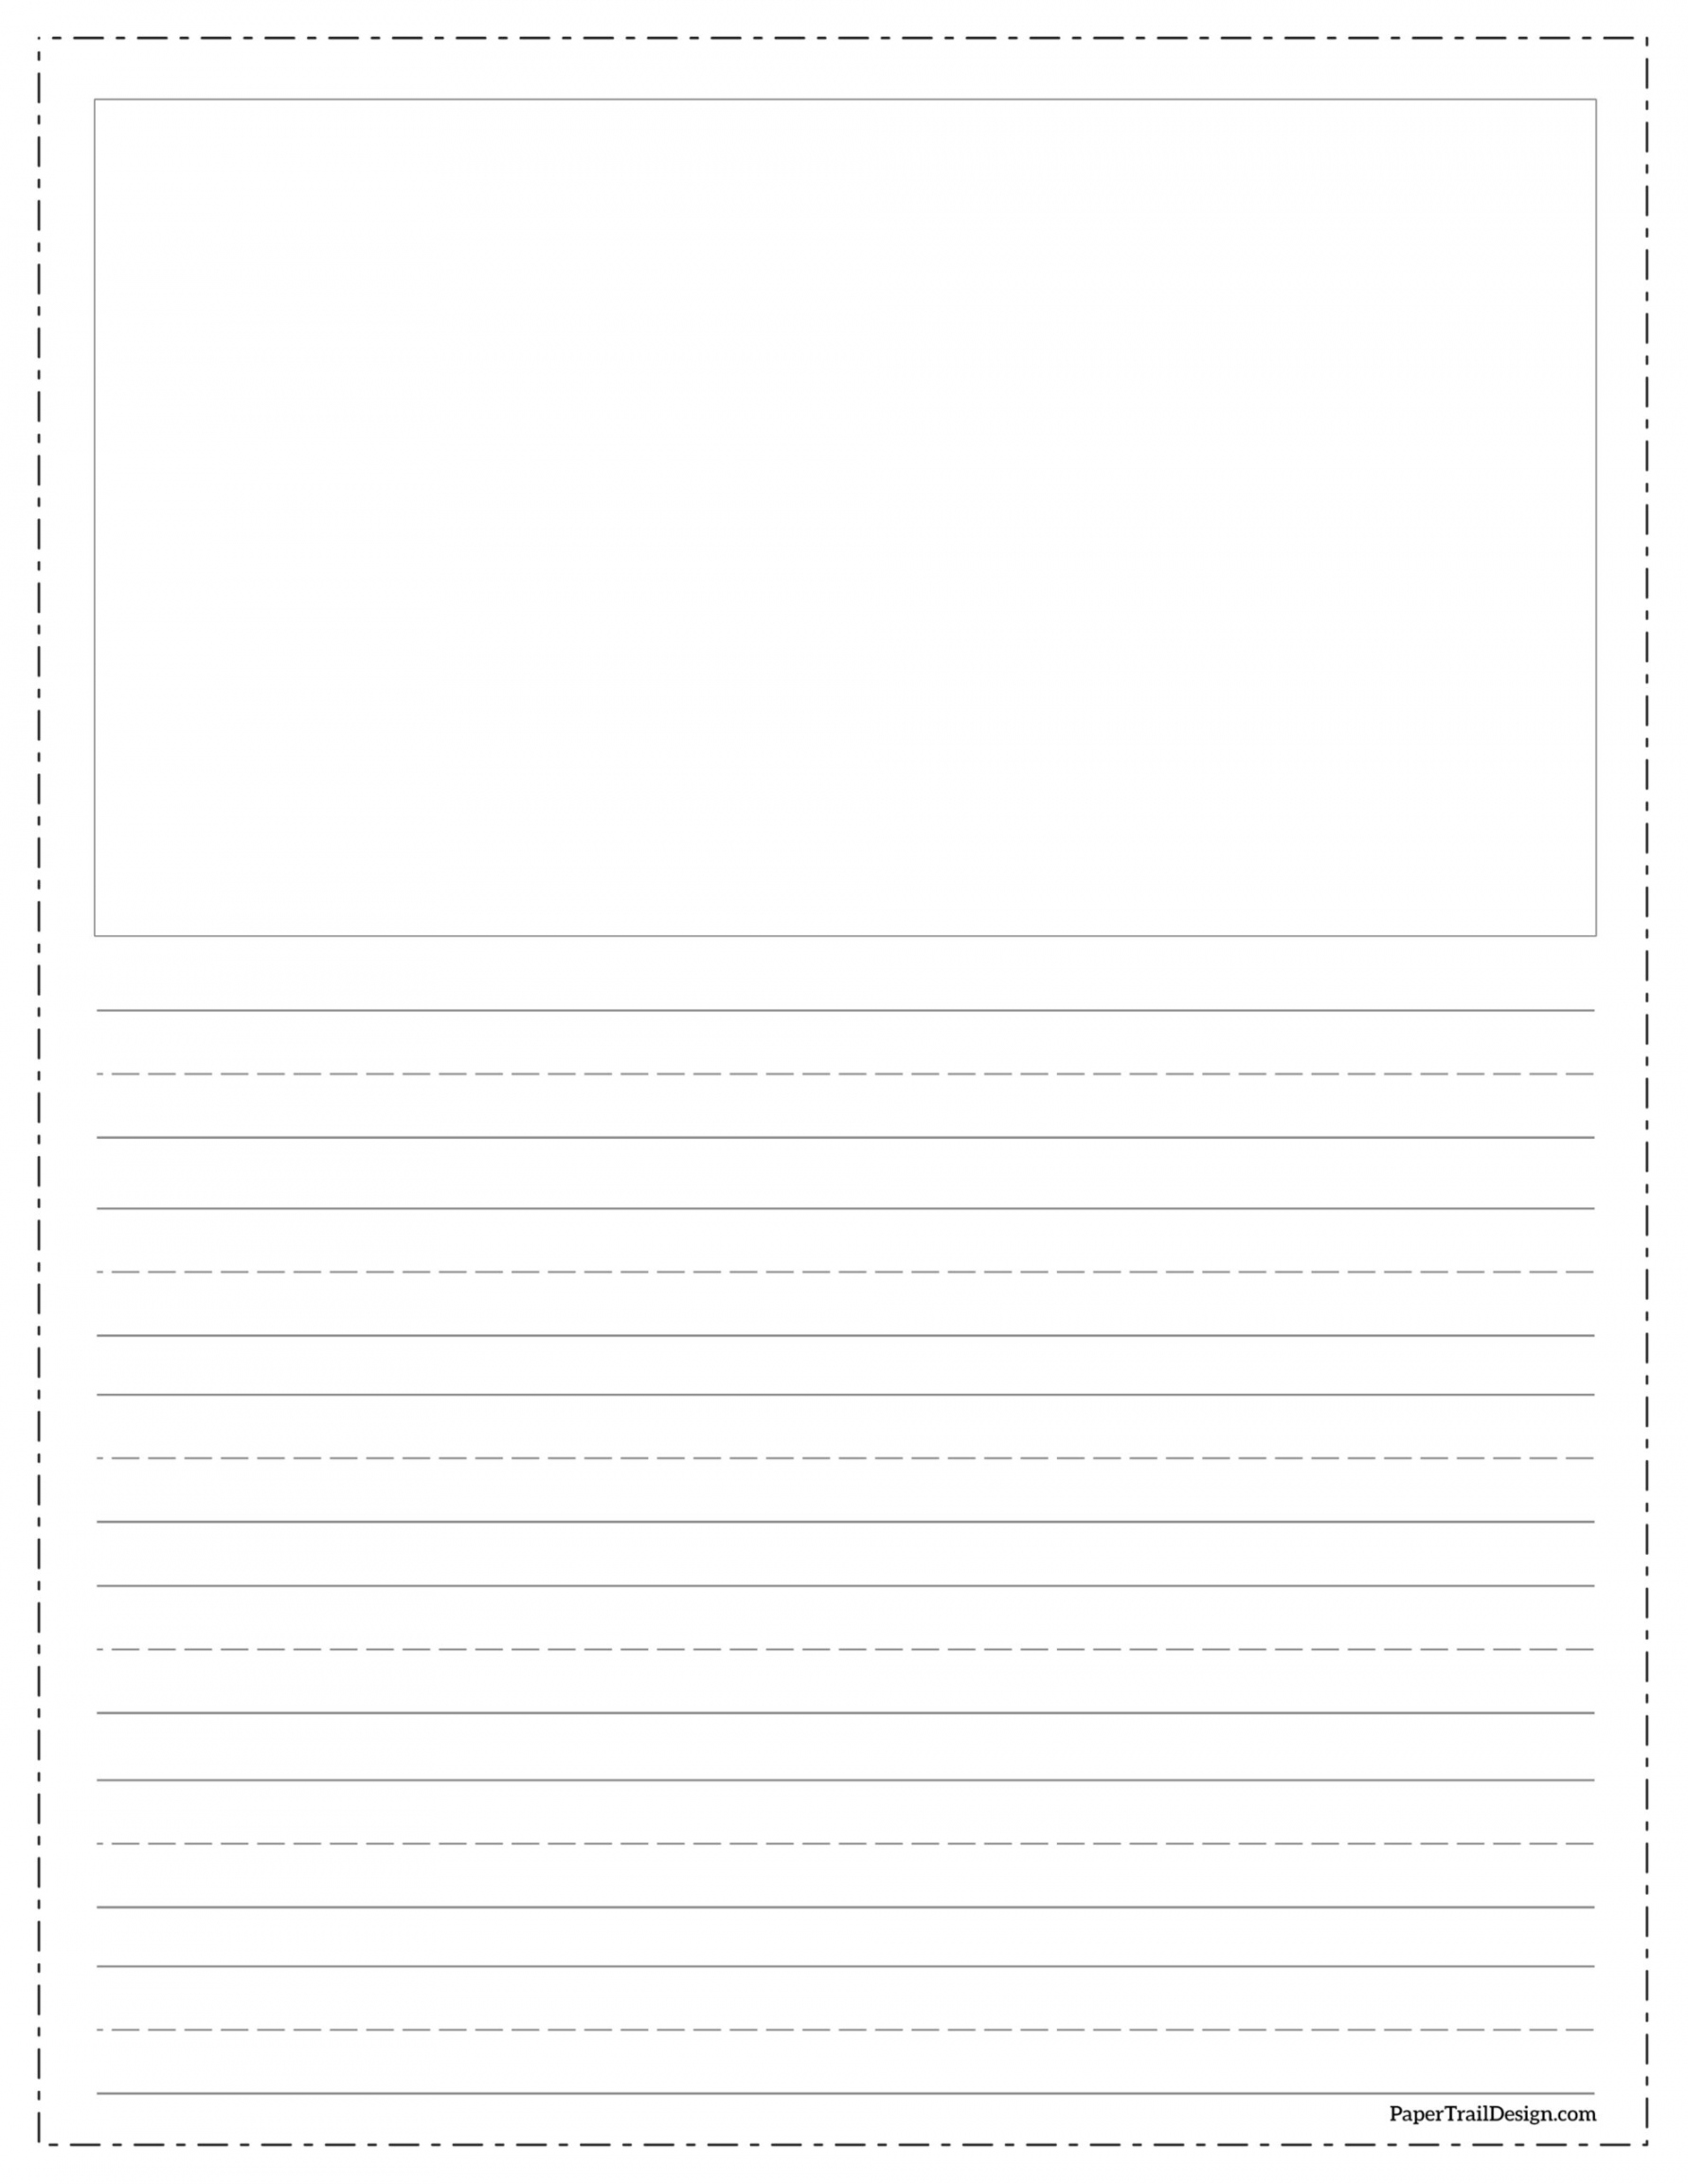 Free Printable Lined Writing Paper with Drawing Box - Paper Trail  - FREE Printables - Kindergarten Printable Writing Paper